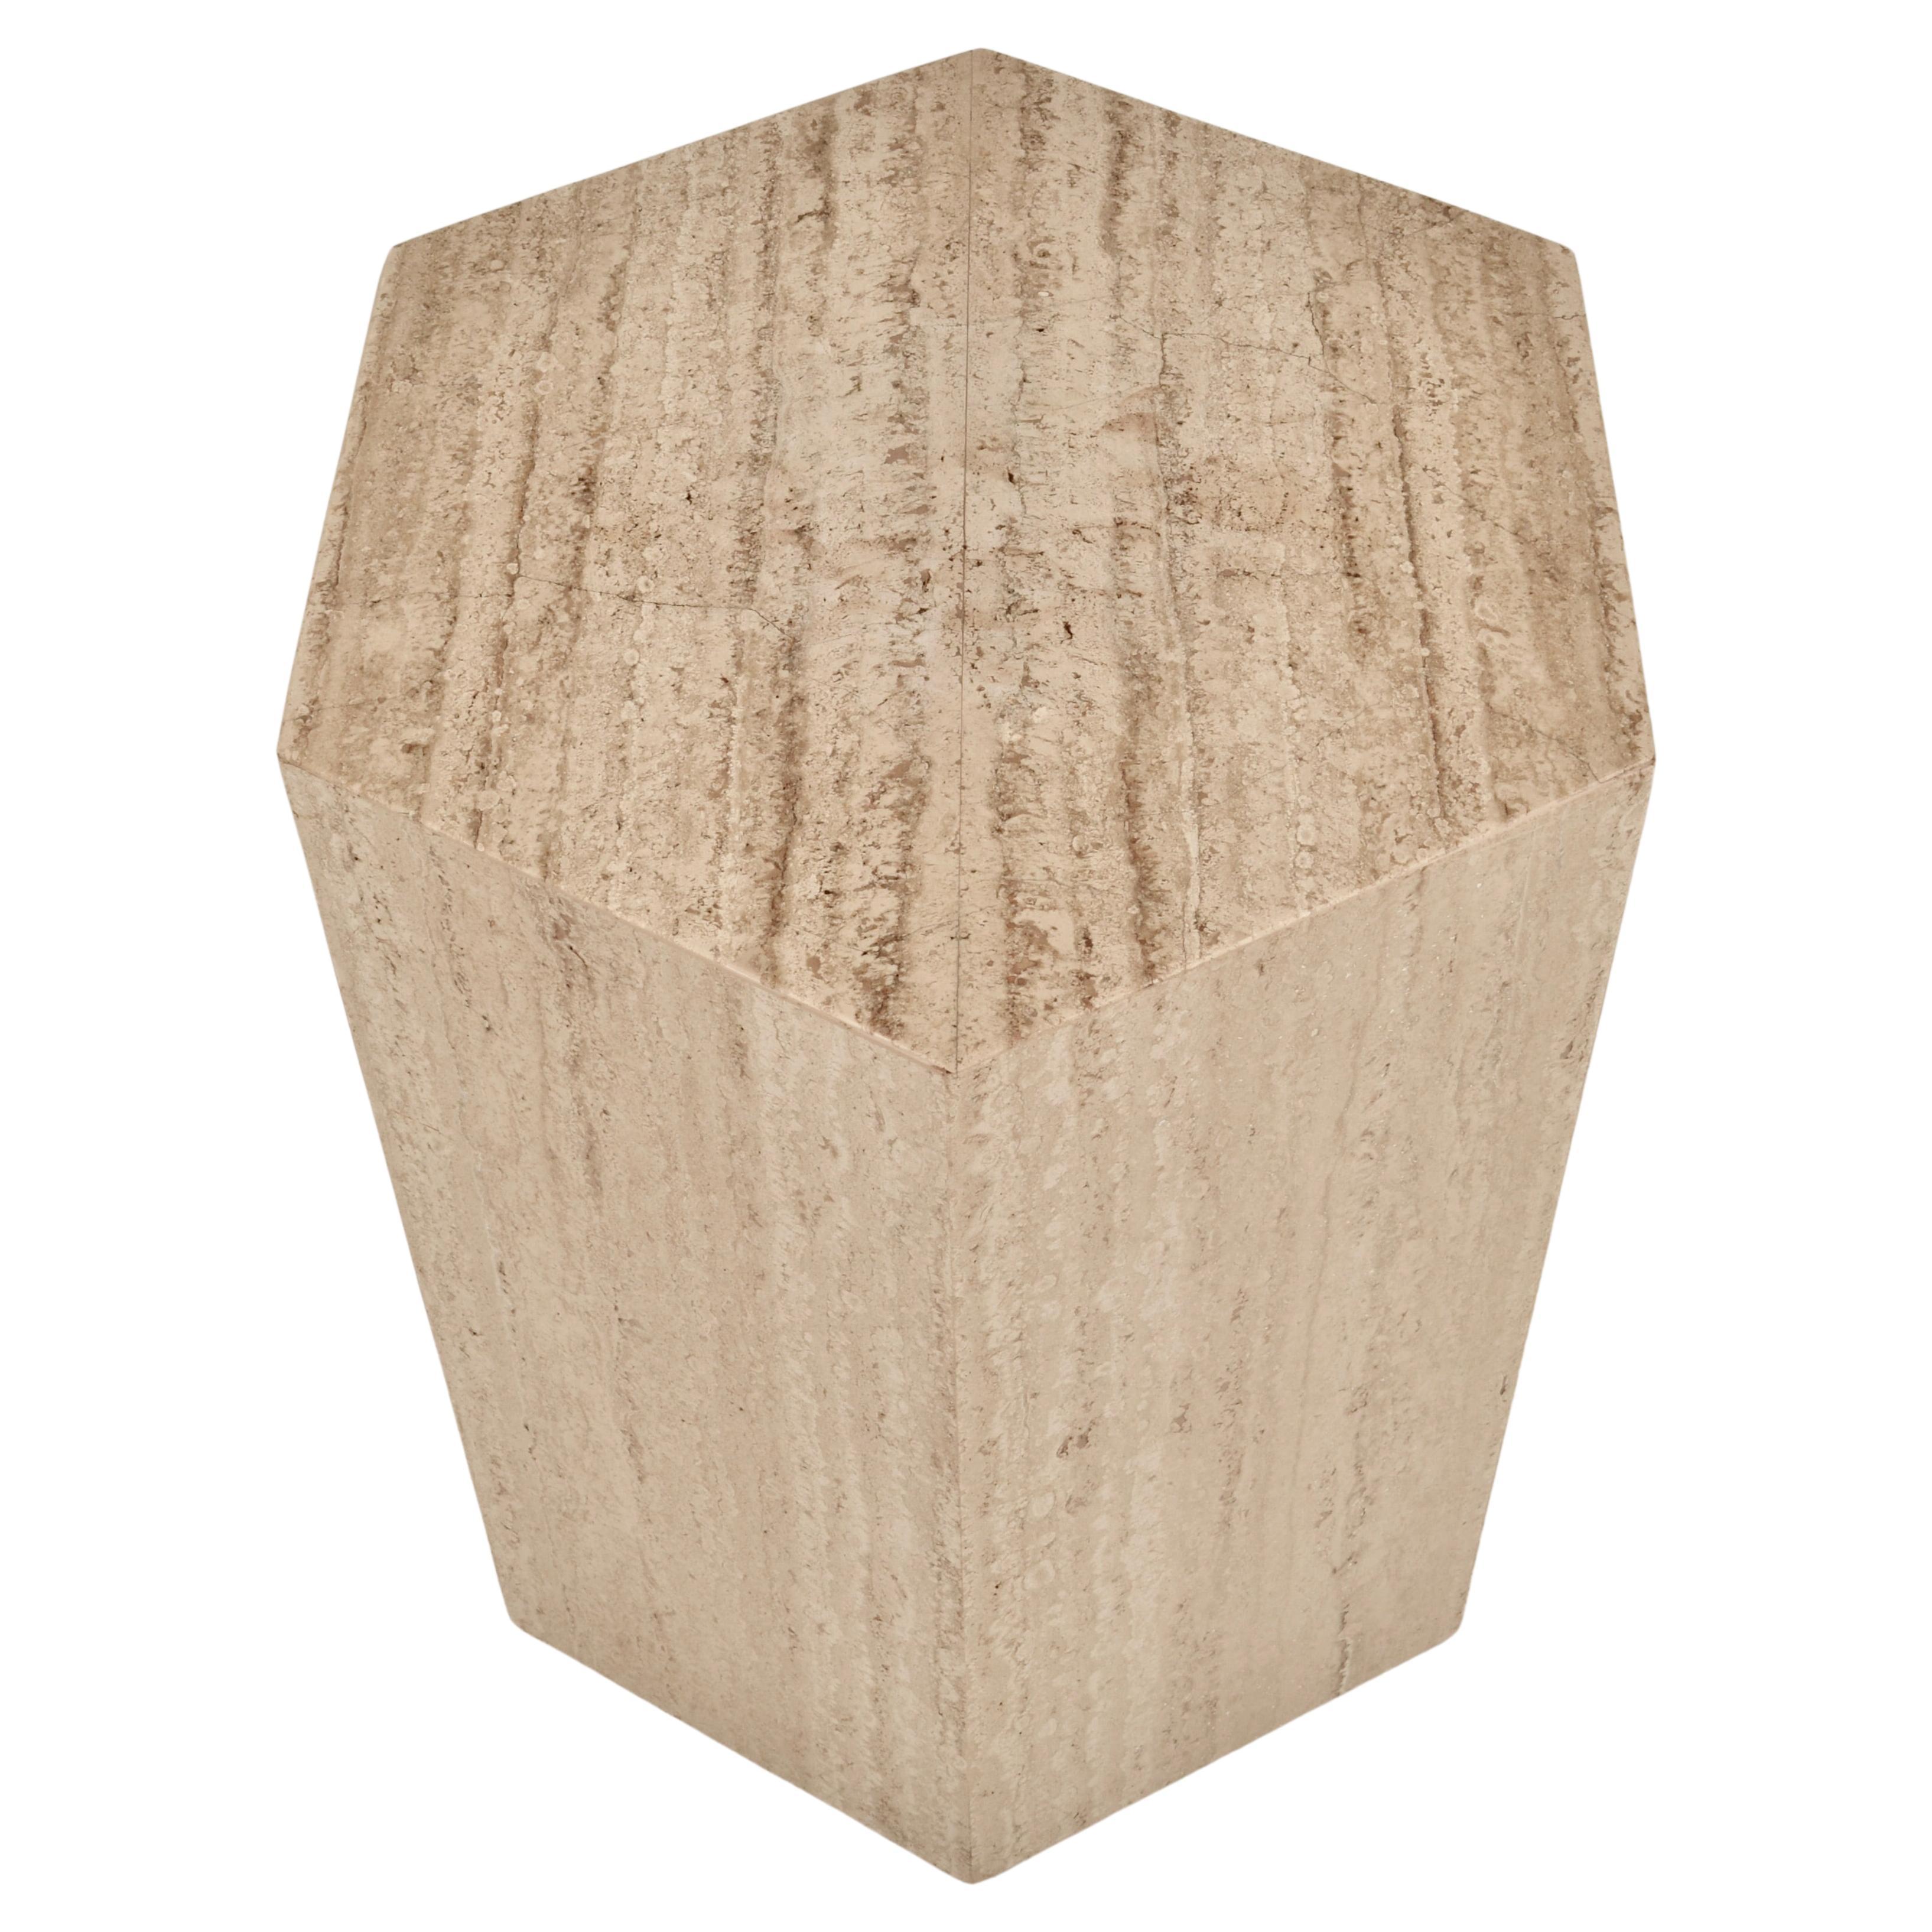 Simple hexagonal form table in Italian travertine marble. This example if very clean. Lovely coloration in the stone. Original felt under-cover. 